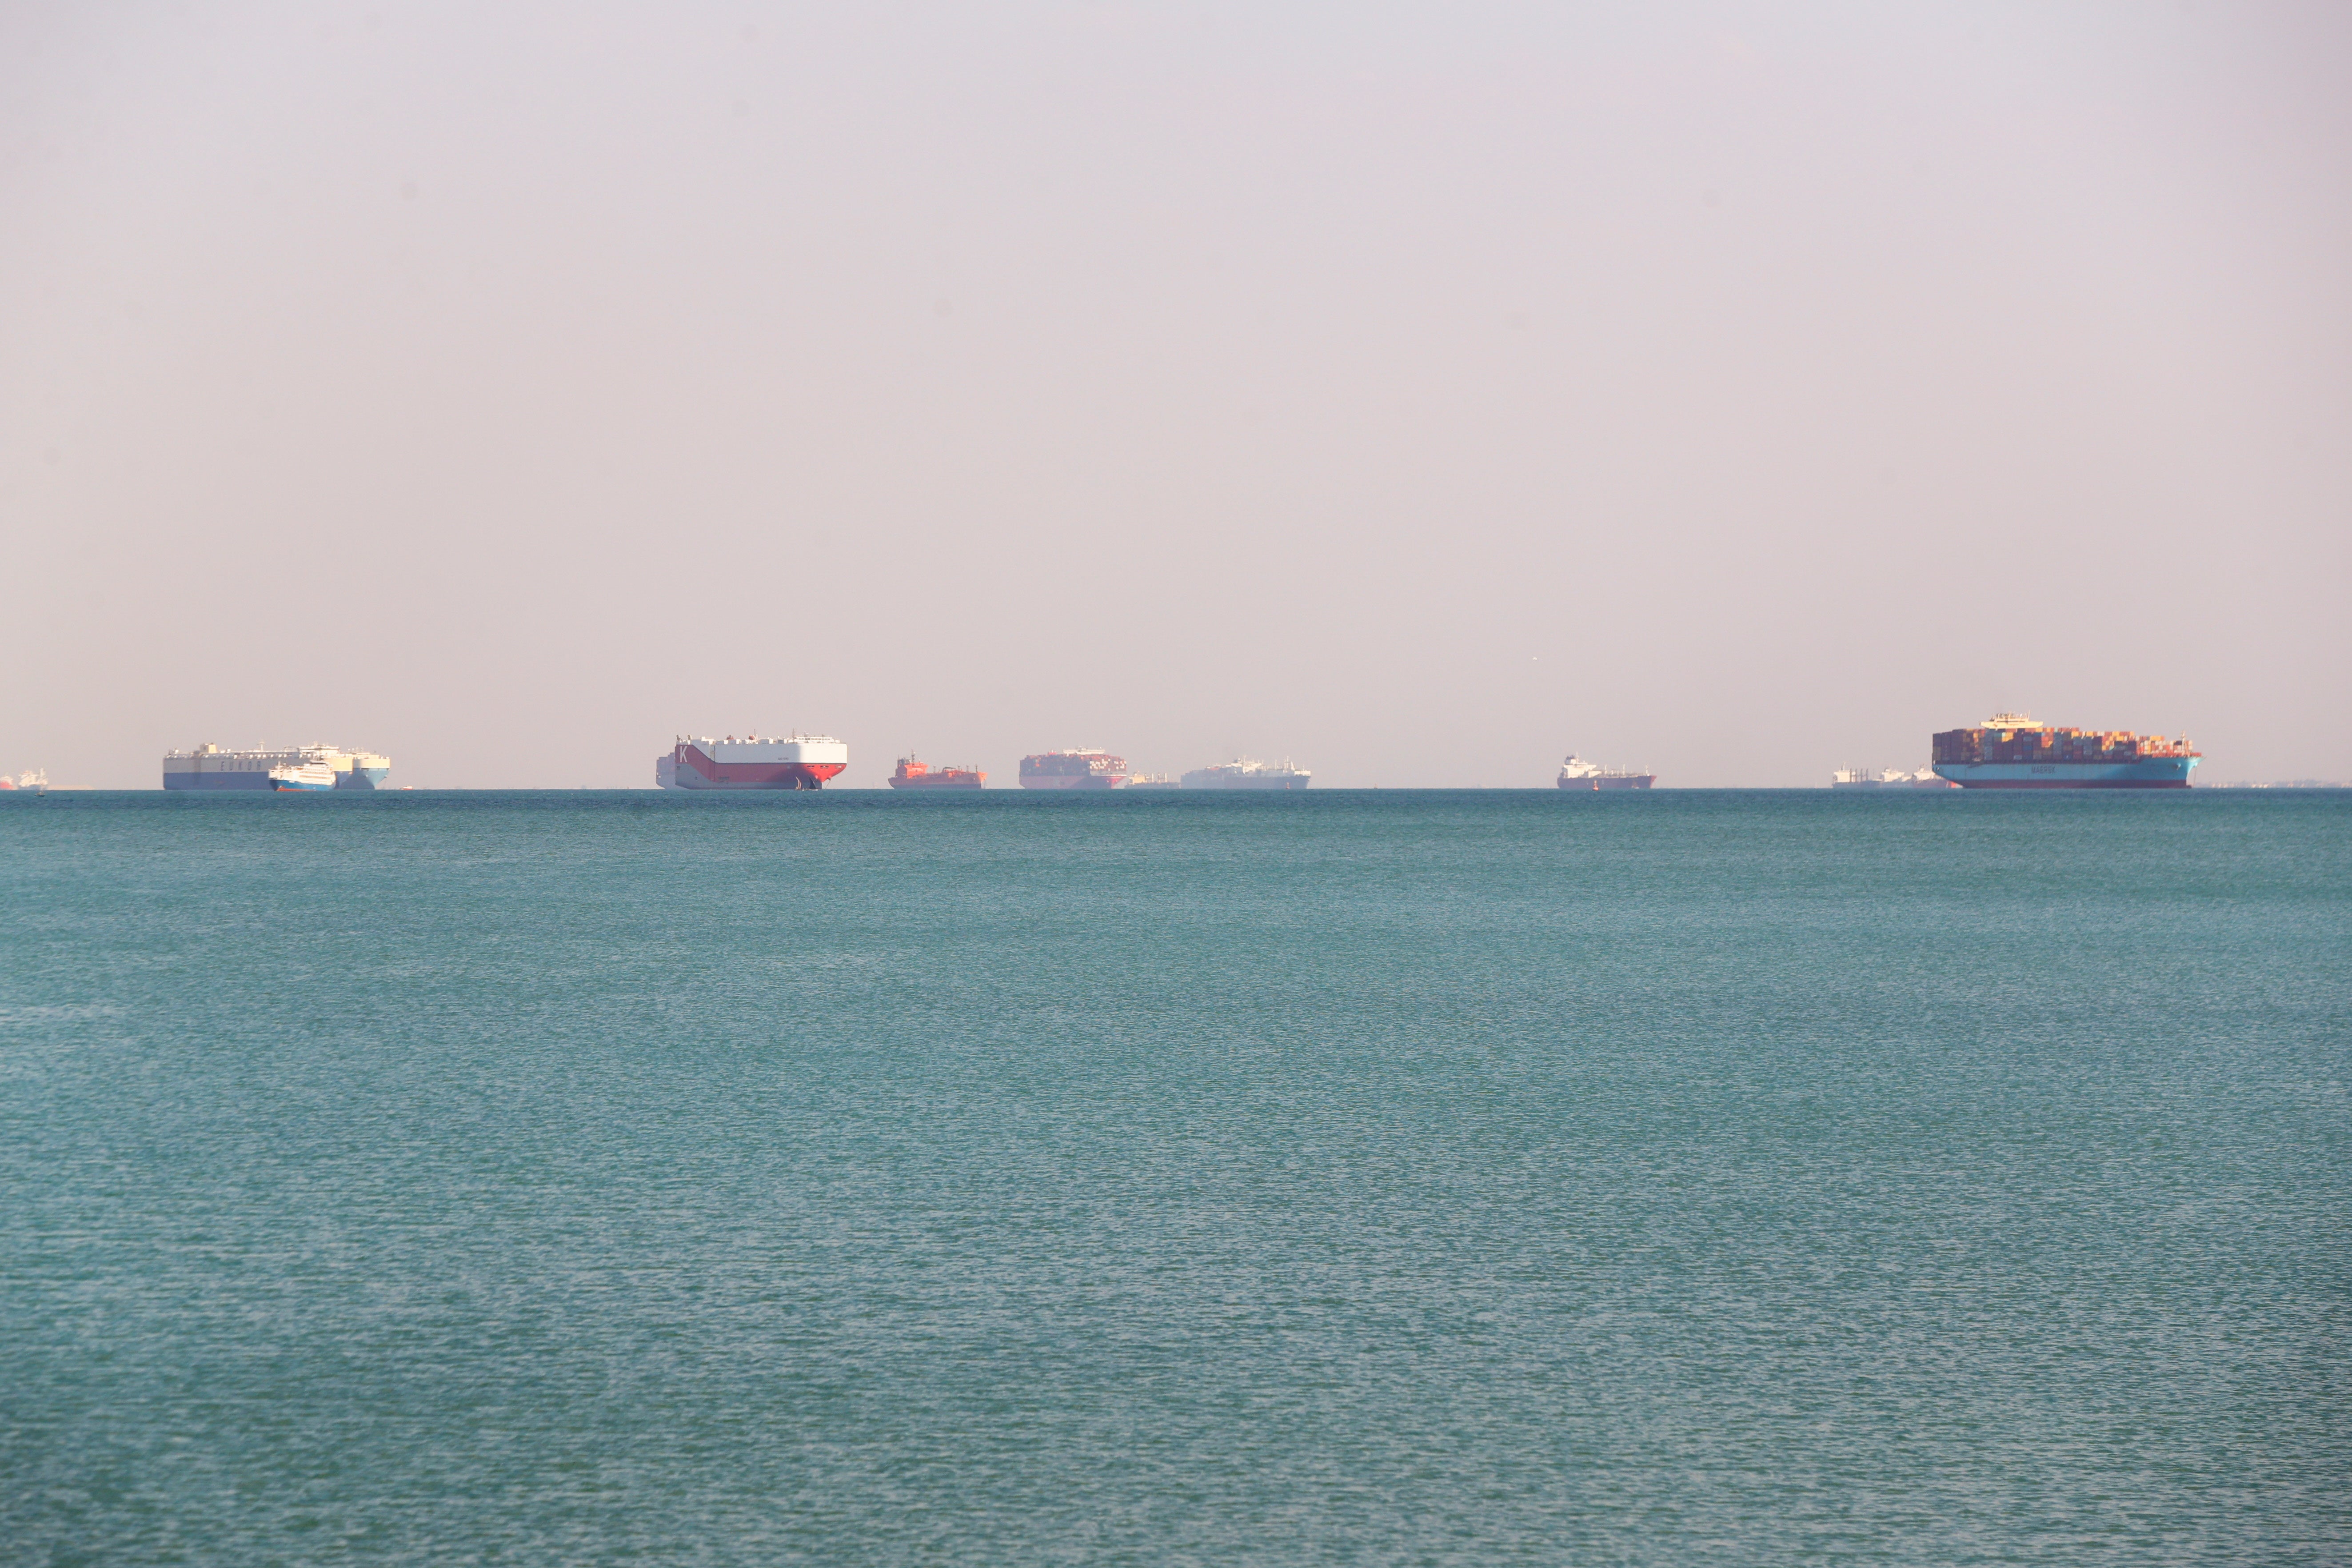 Container ships waiting outside the Suez Canal